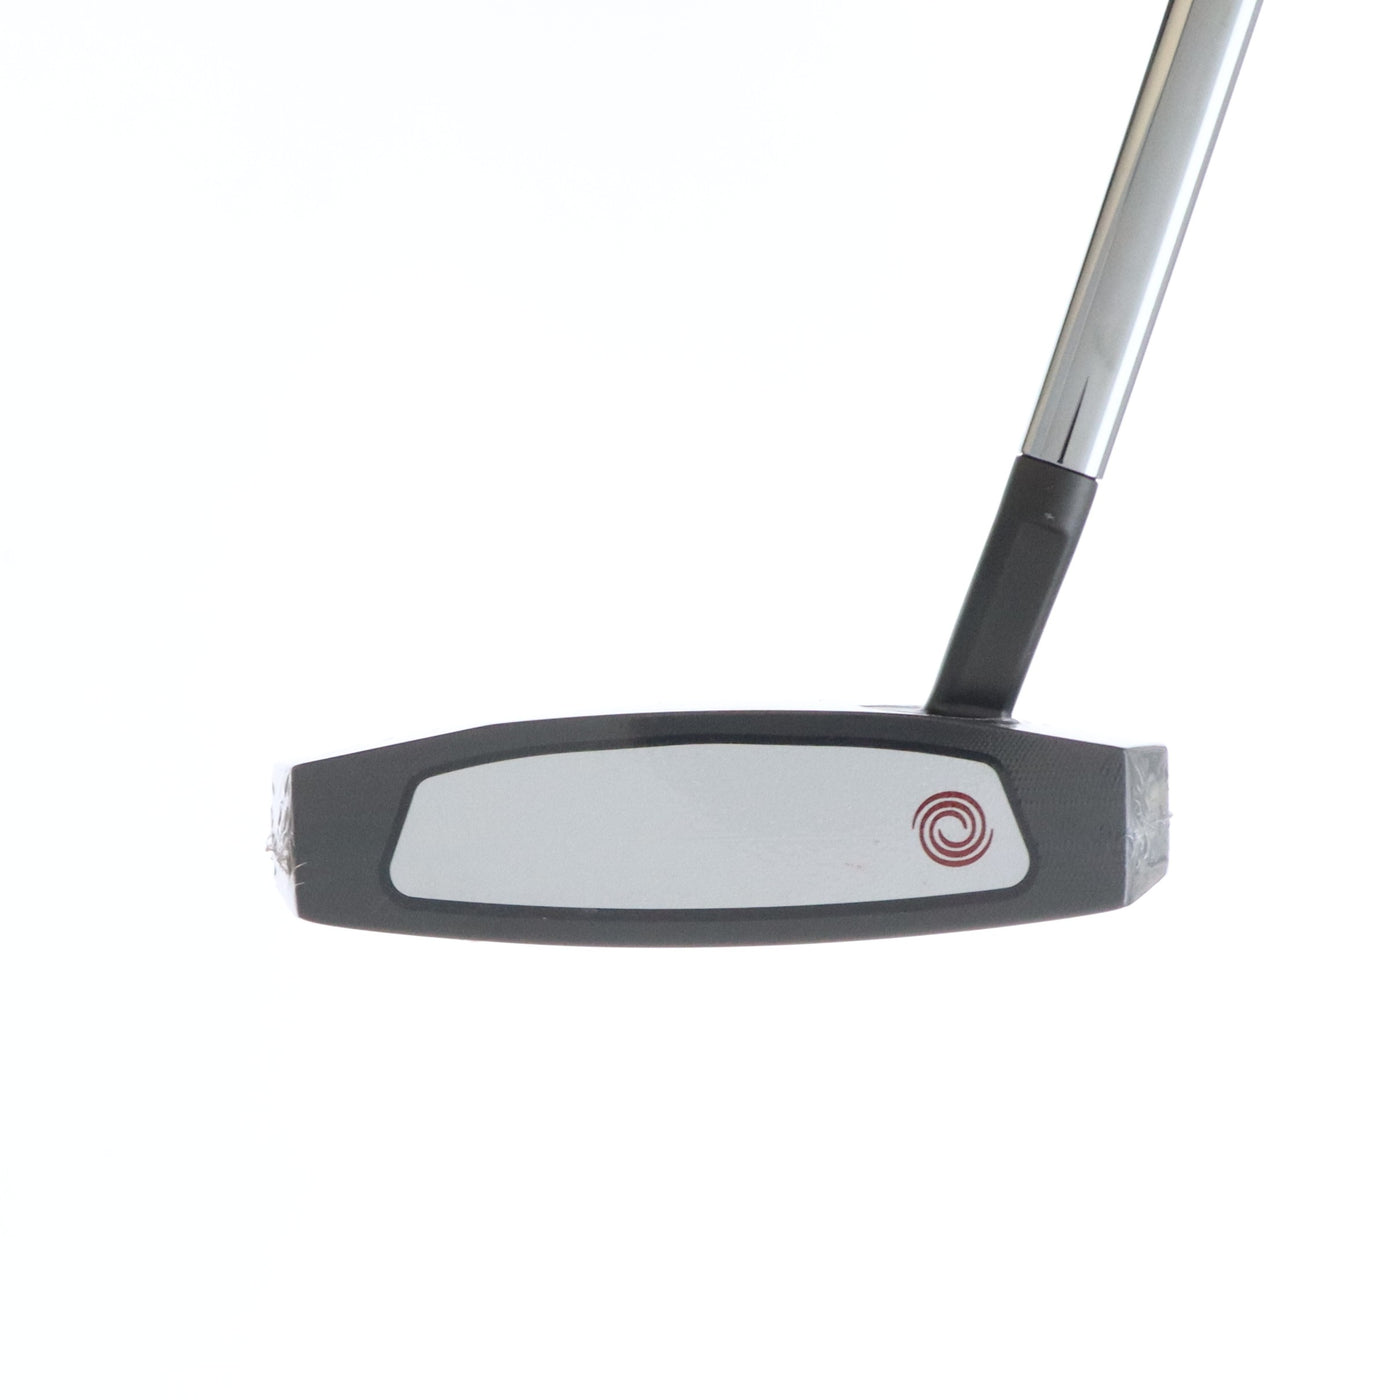 Odyssey Putter Brand New 2-BALL ELEVEN TOUR LINED S 33 inch